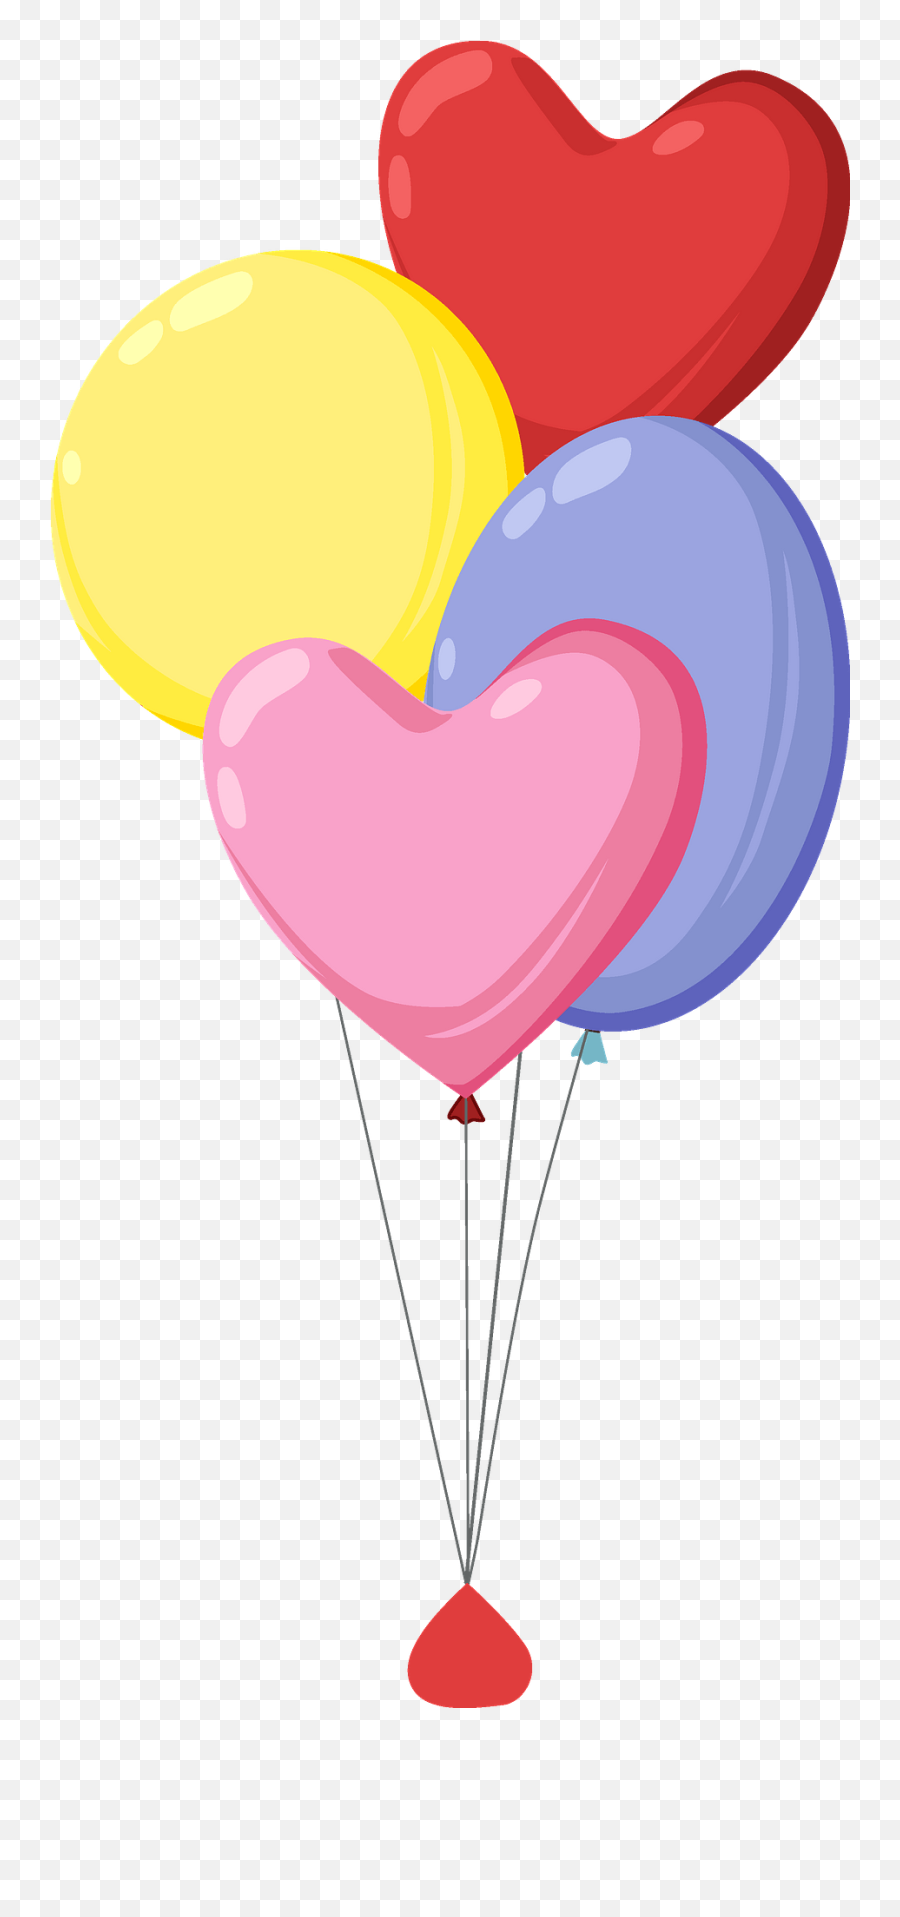 Balloons Clipart Free Download Transparent Png Creazilla - Balloons Clipart,Balloons Clipart Transparent